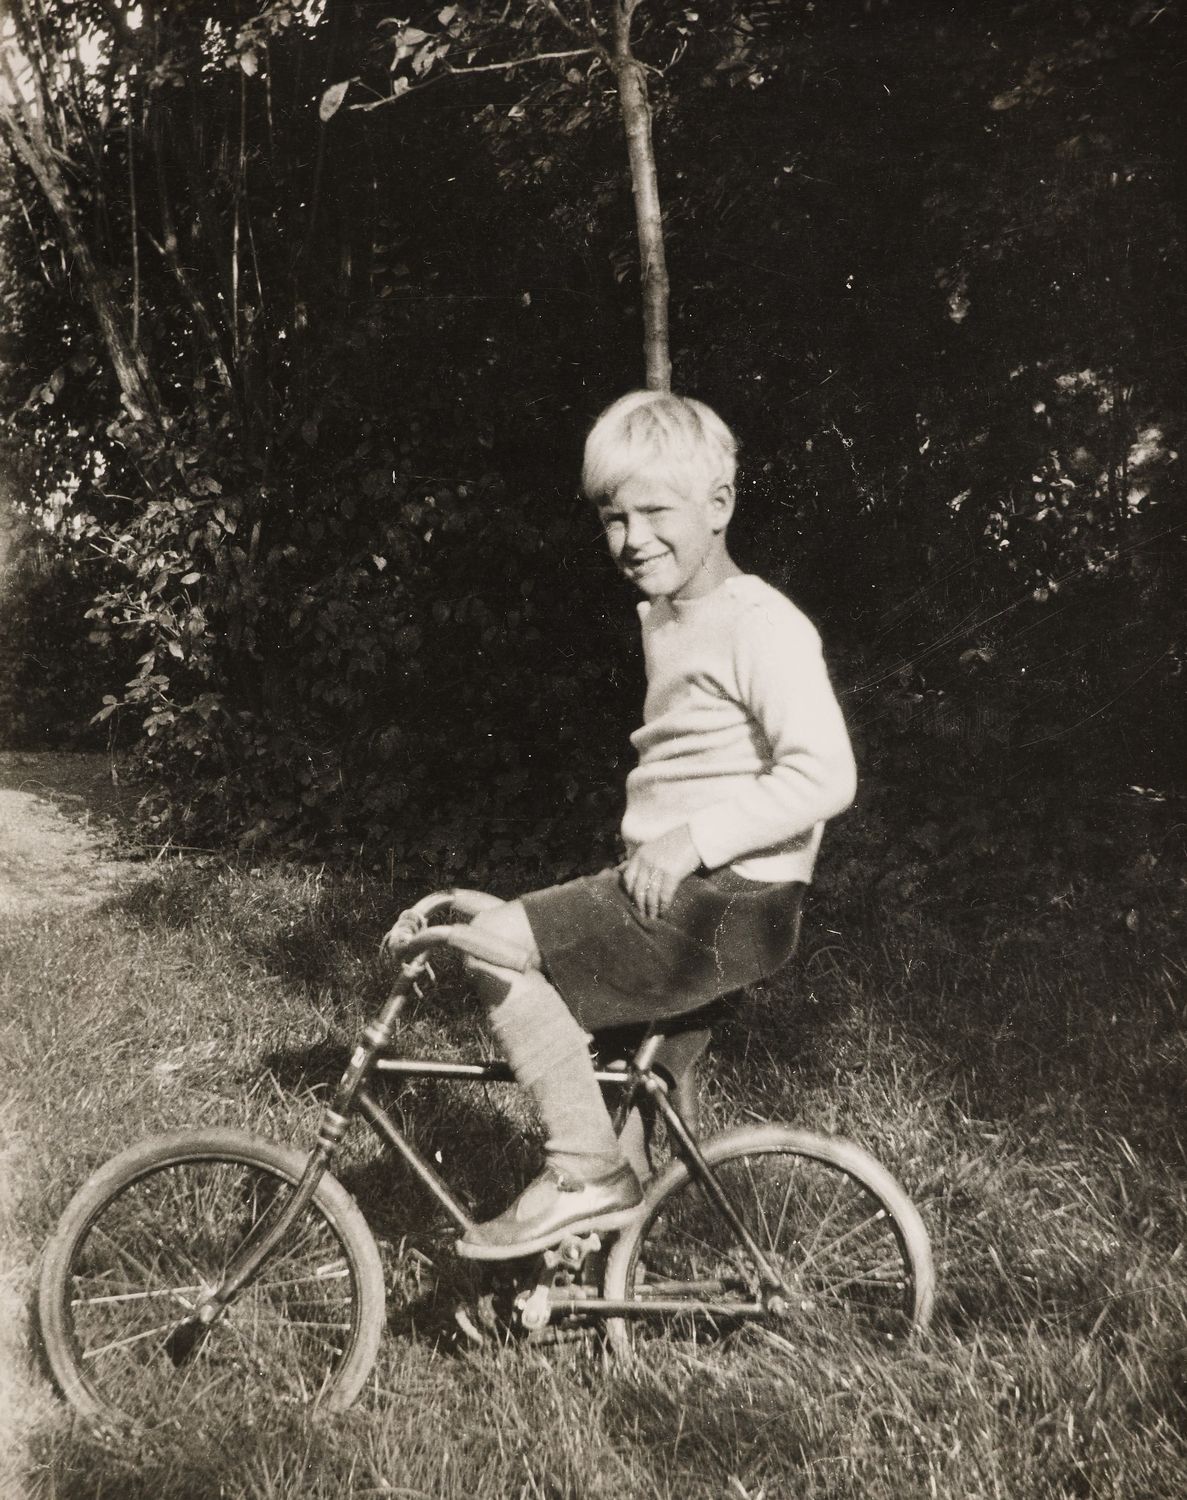 Photograph of Prince Philip of Greece, later HRH The Duke of Edinburgh, seated on a bicycle in left side profile. He faces the viewer, smiling.